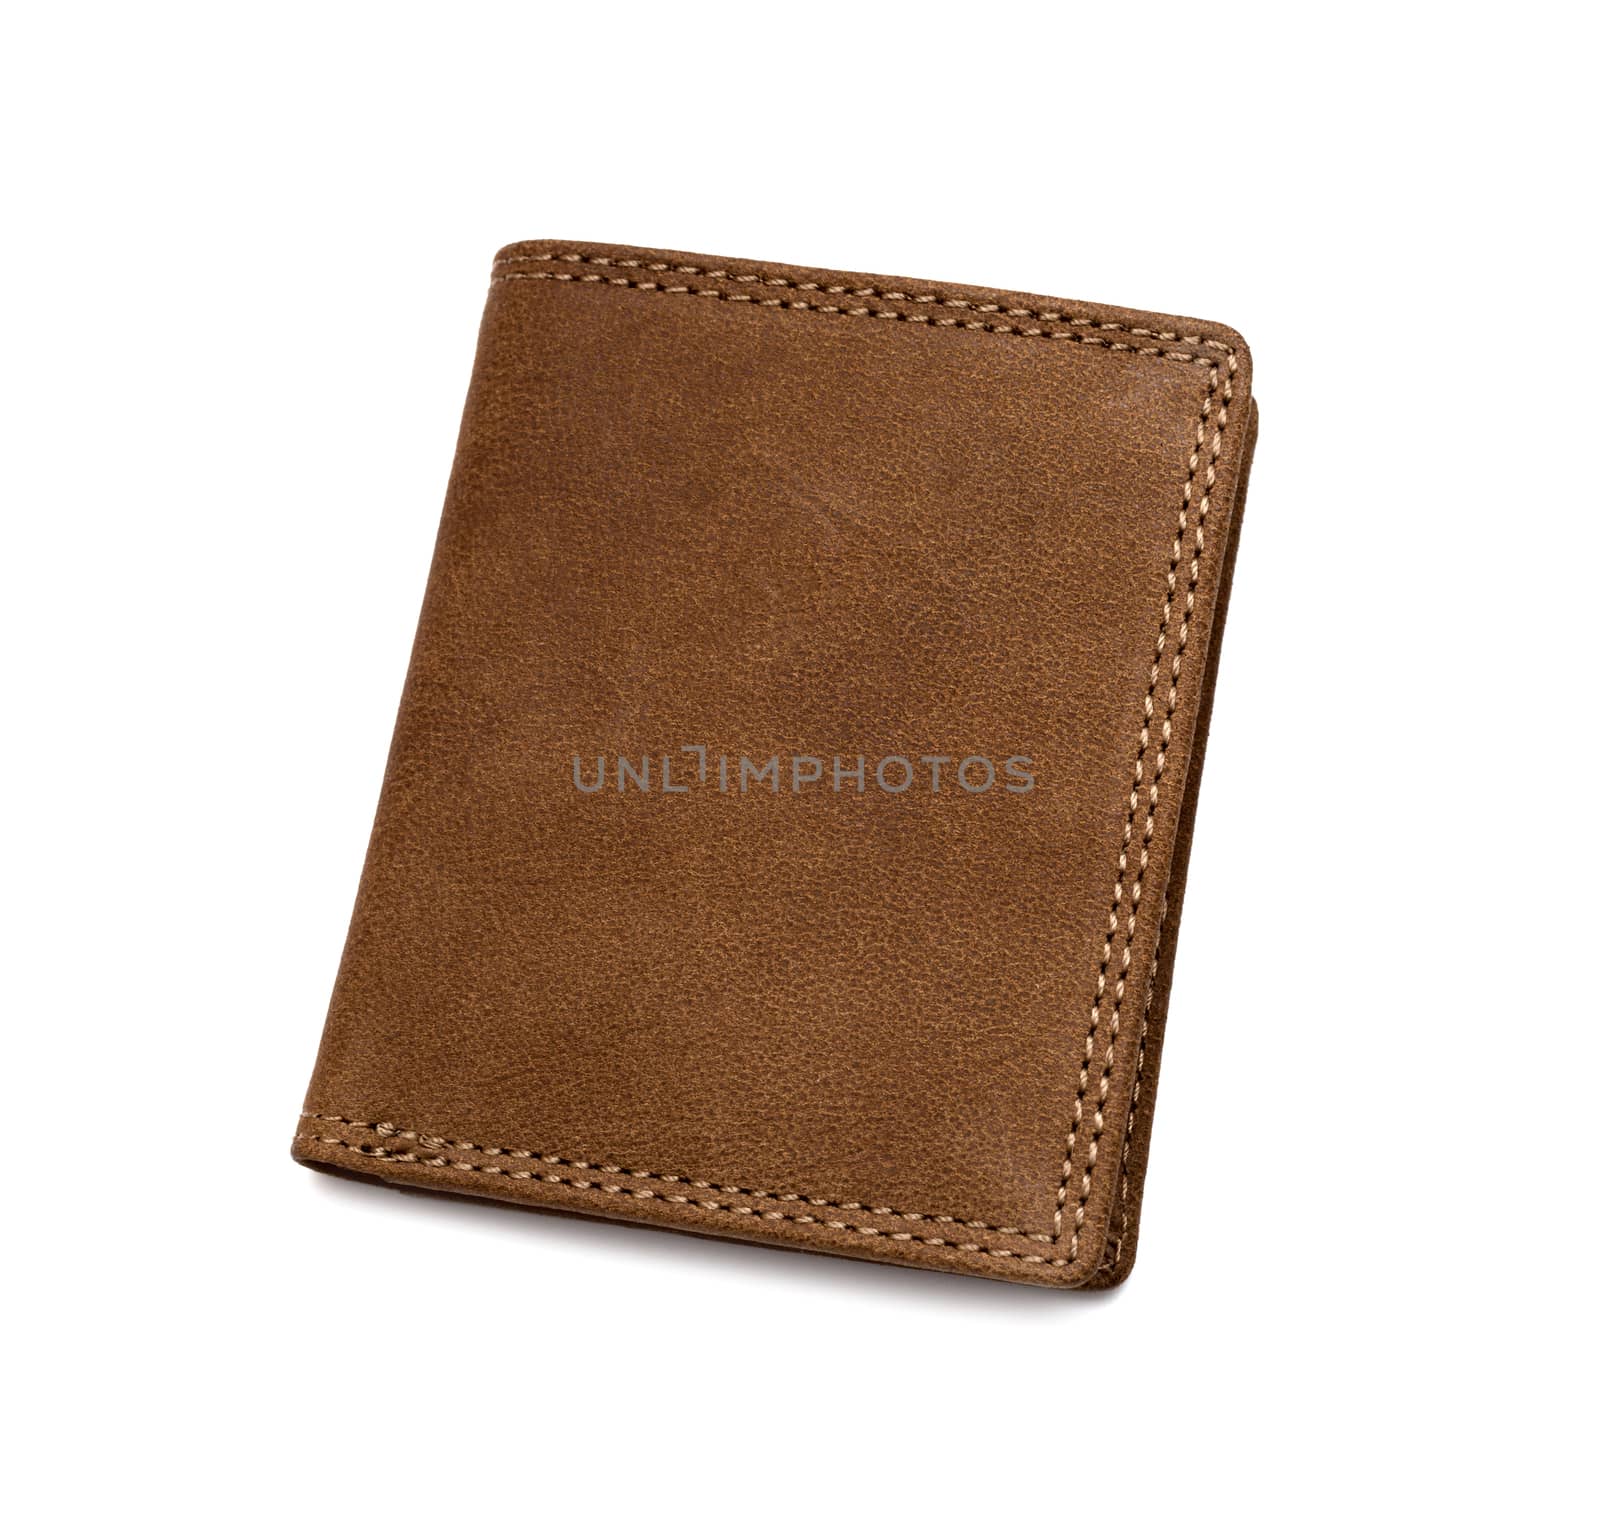 Brown leather wallet isolated on white background.